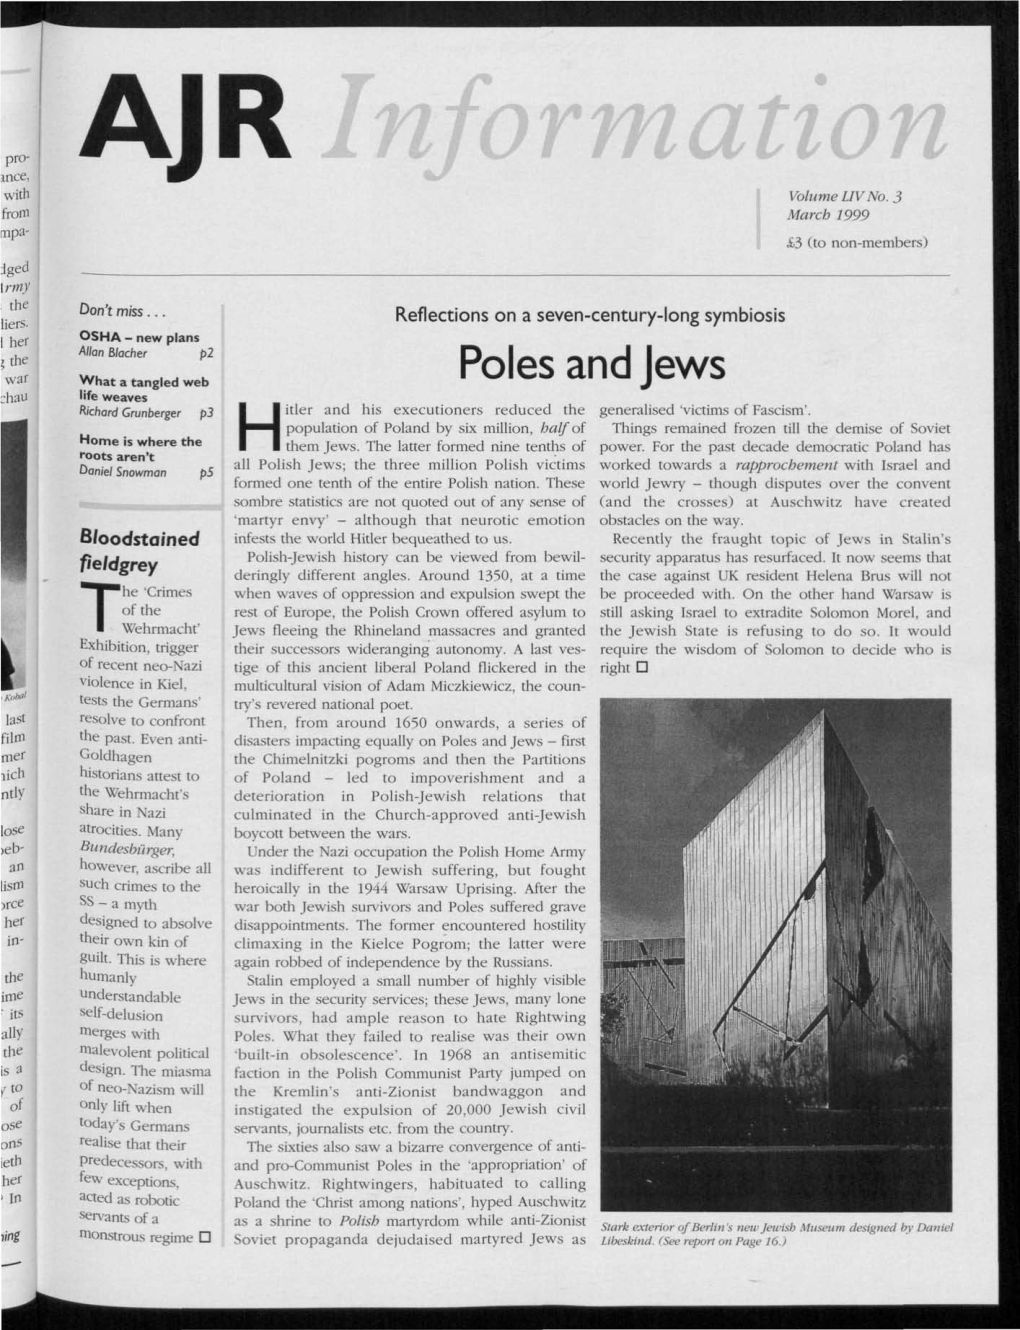 Poles and Jews Life Weaves Richard Grunberger P3 Itler and His Executioners Reduced the Generalised 'Victims of Fascism'